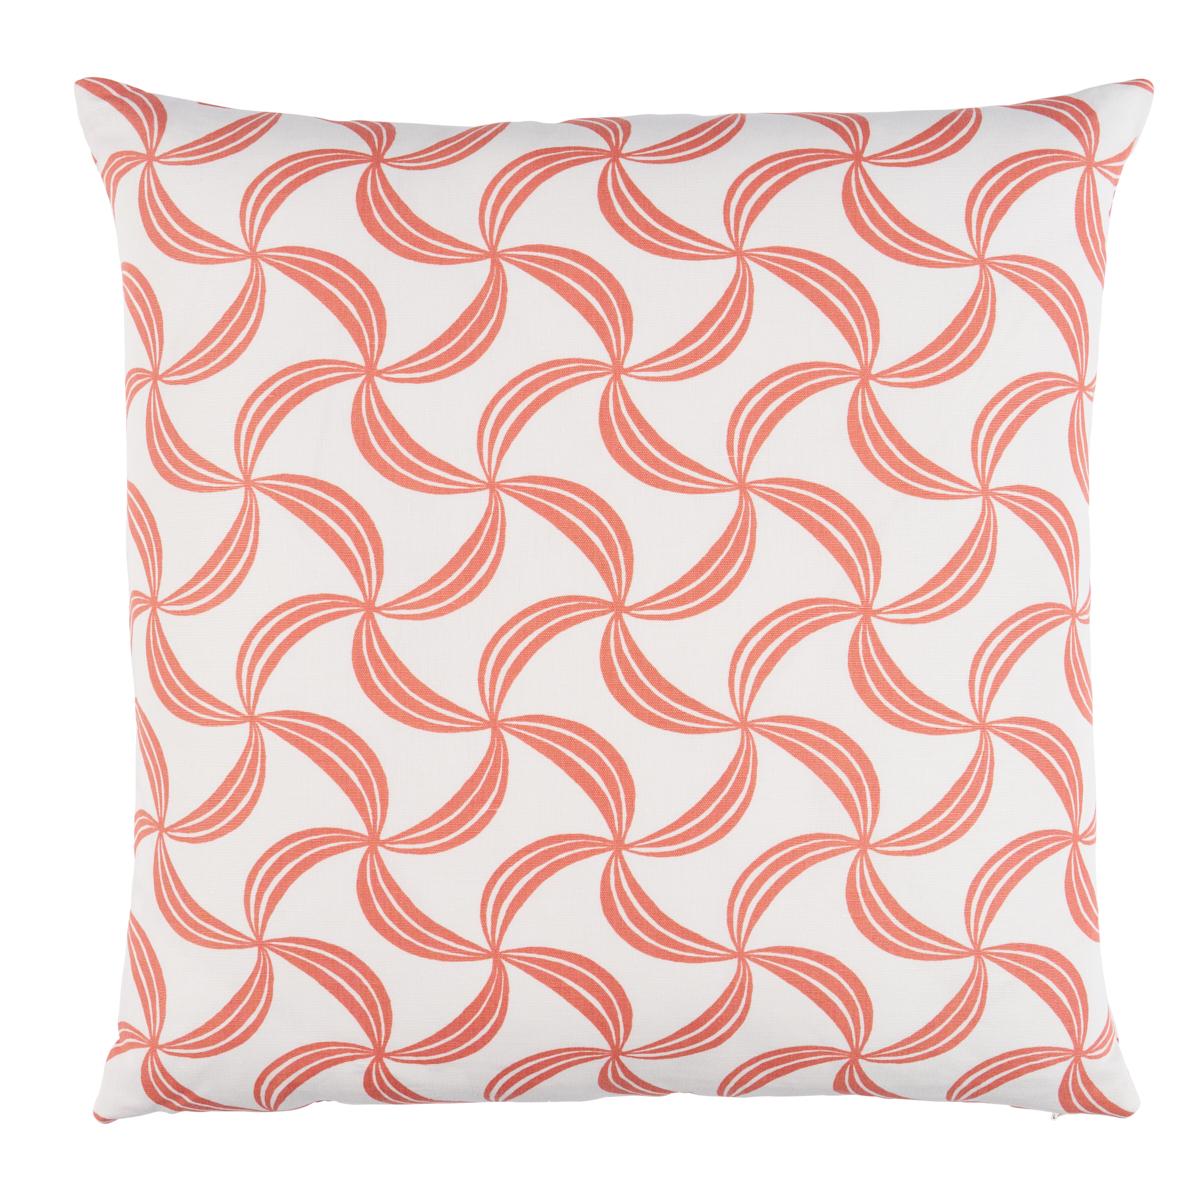 Ambrosia Pillow in Coral 22 x 22"